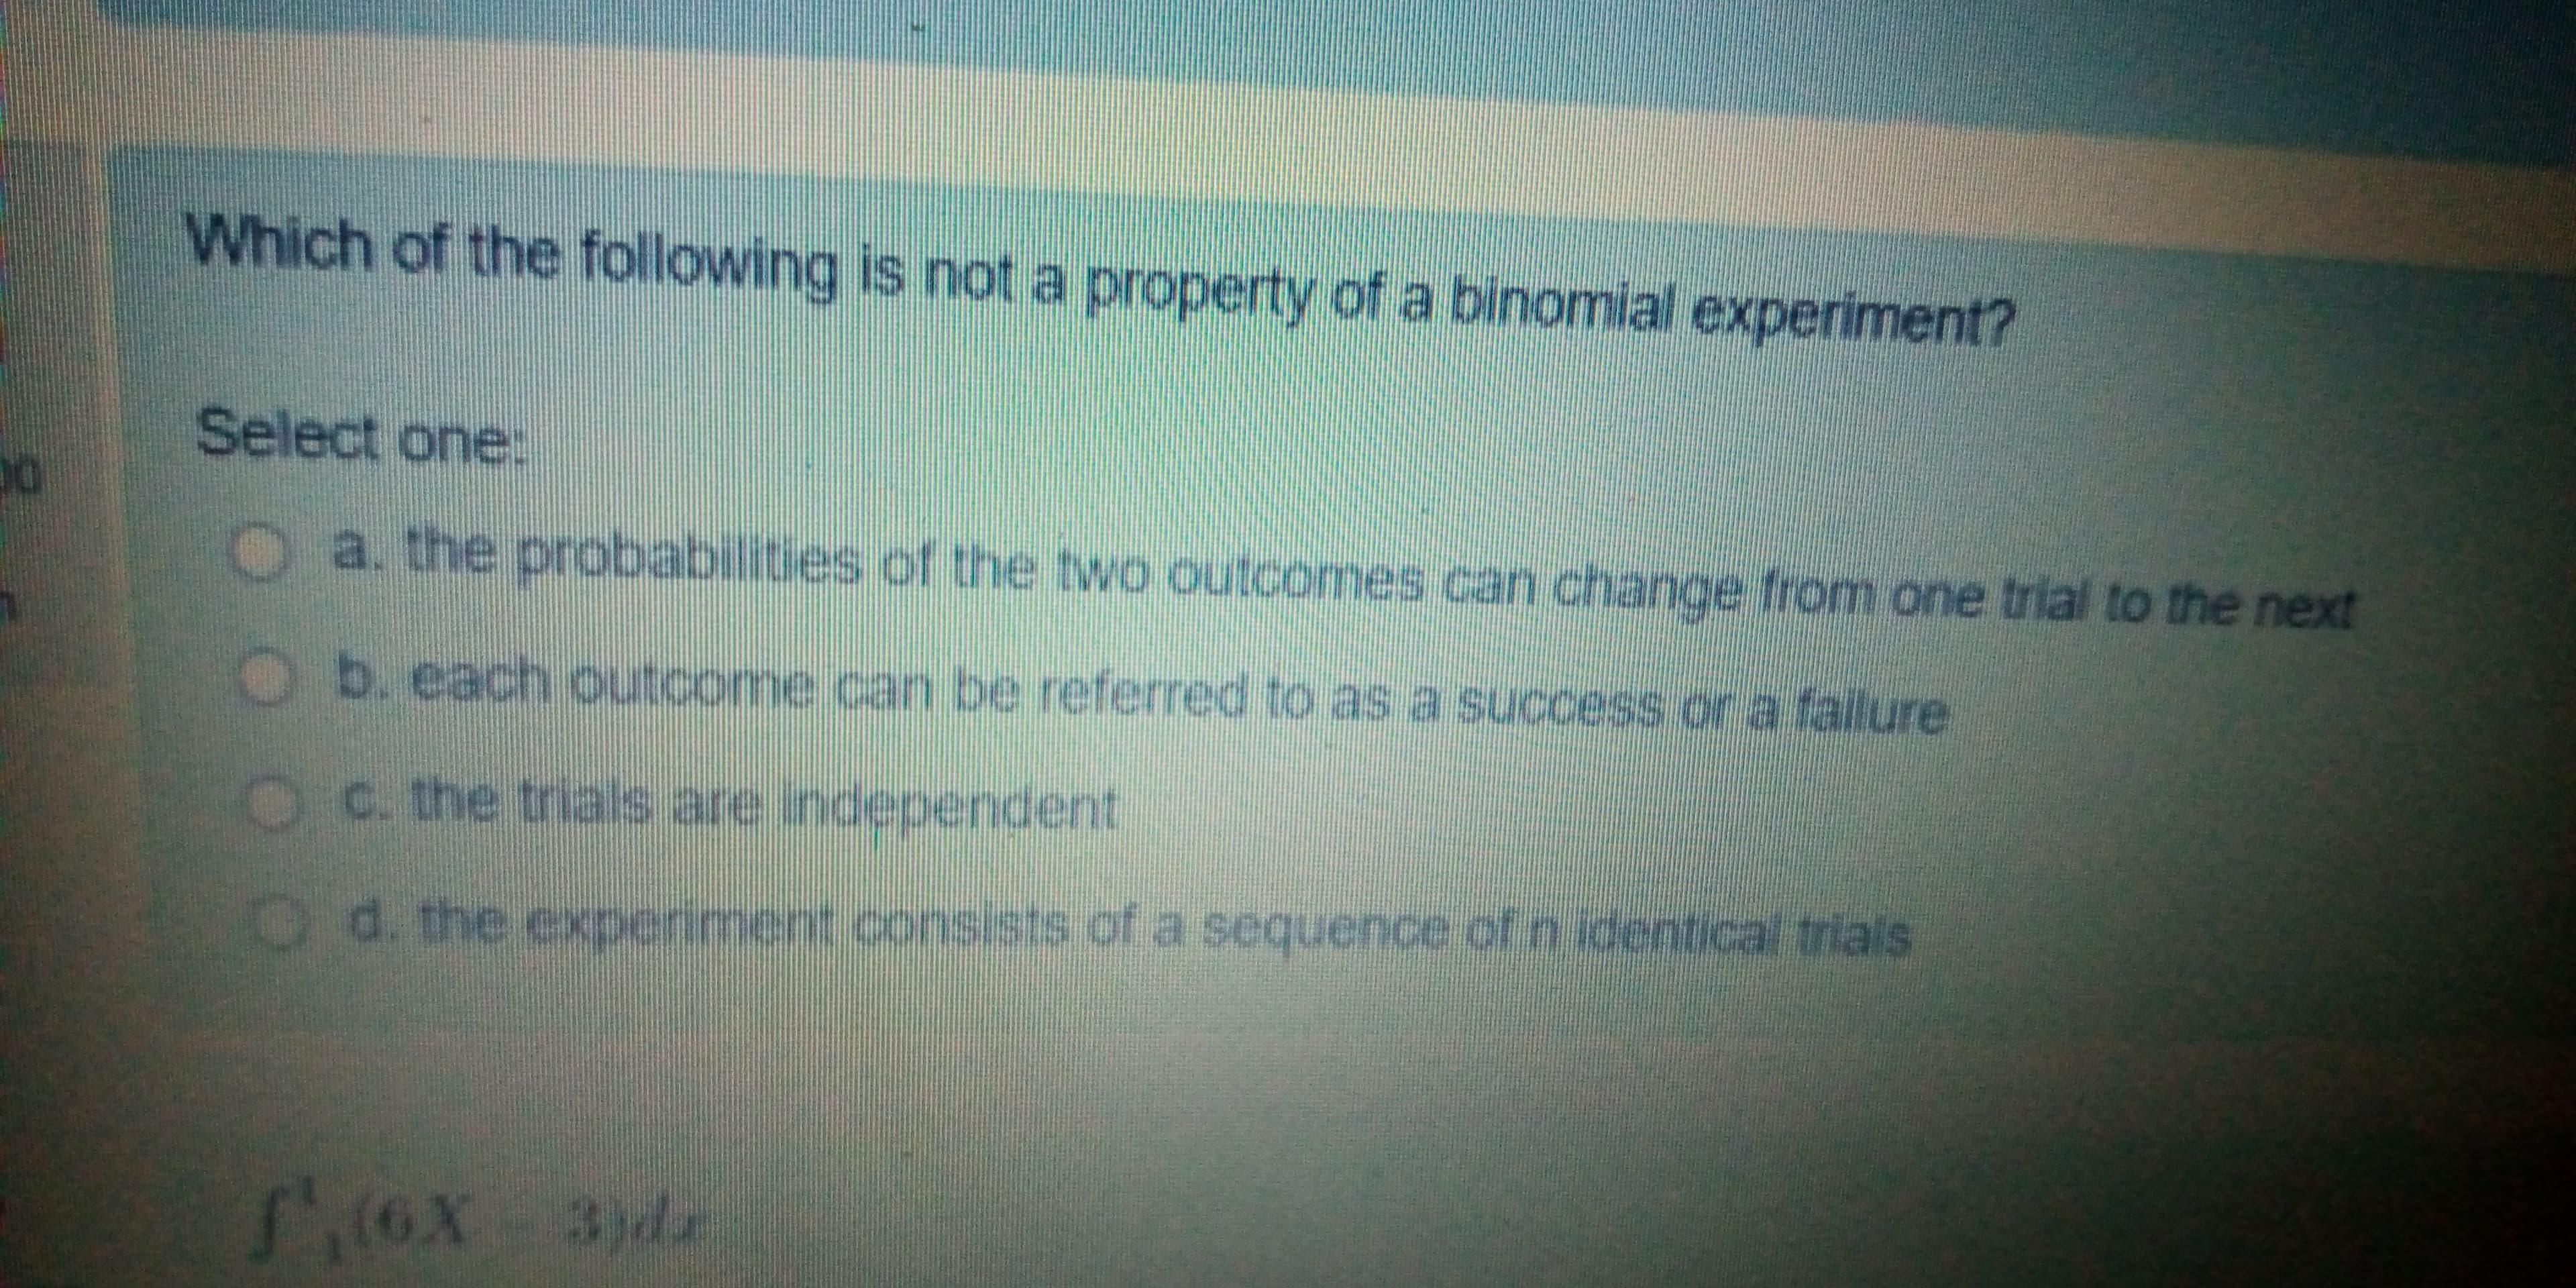 Which of the following is not a property of a binomial experiment?
